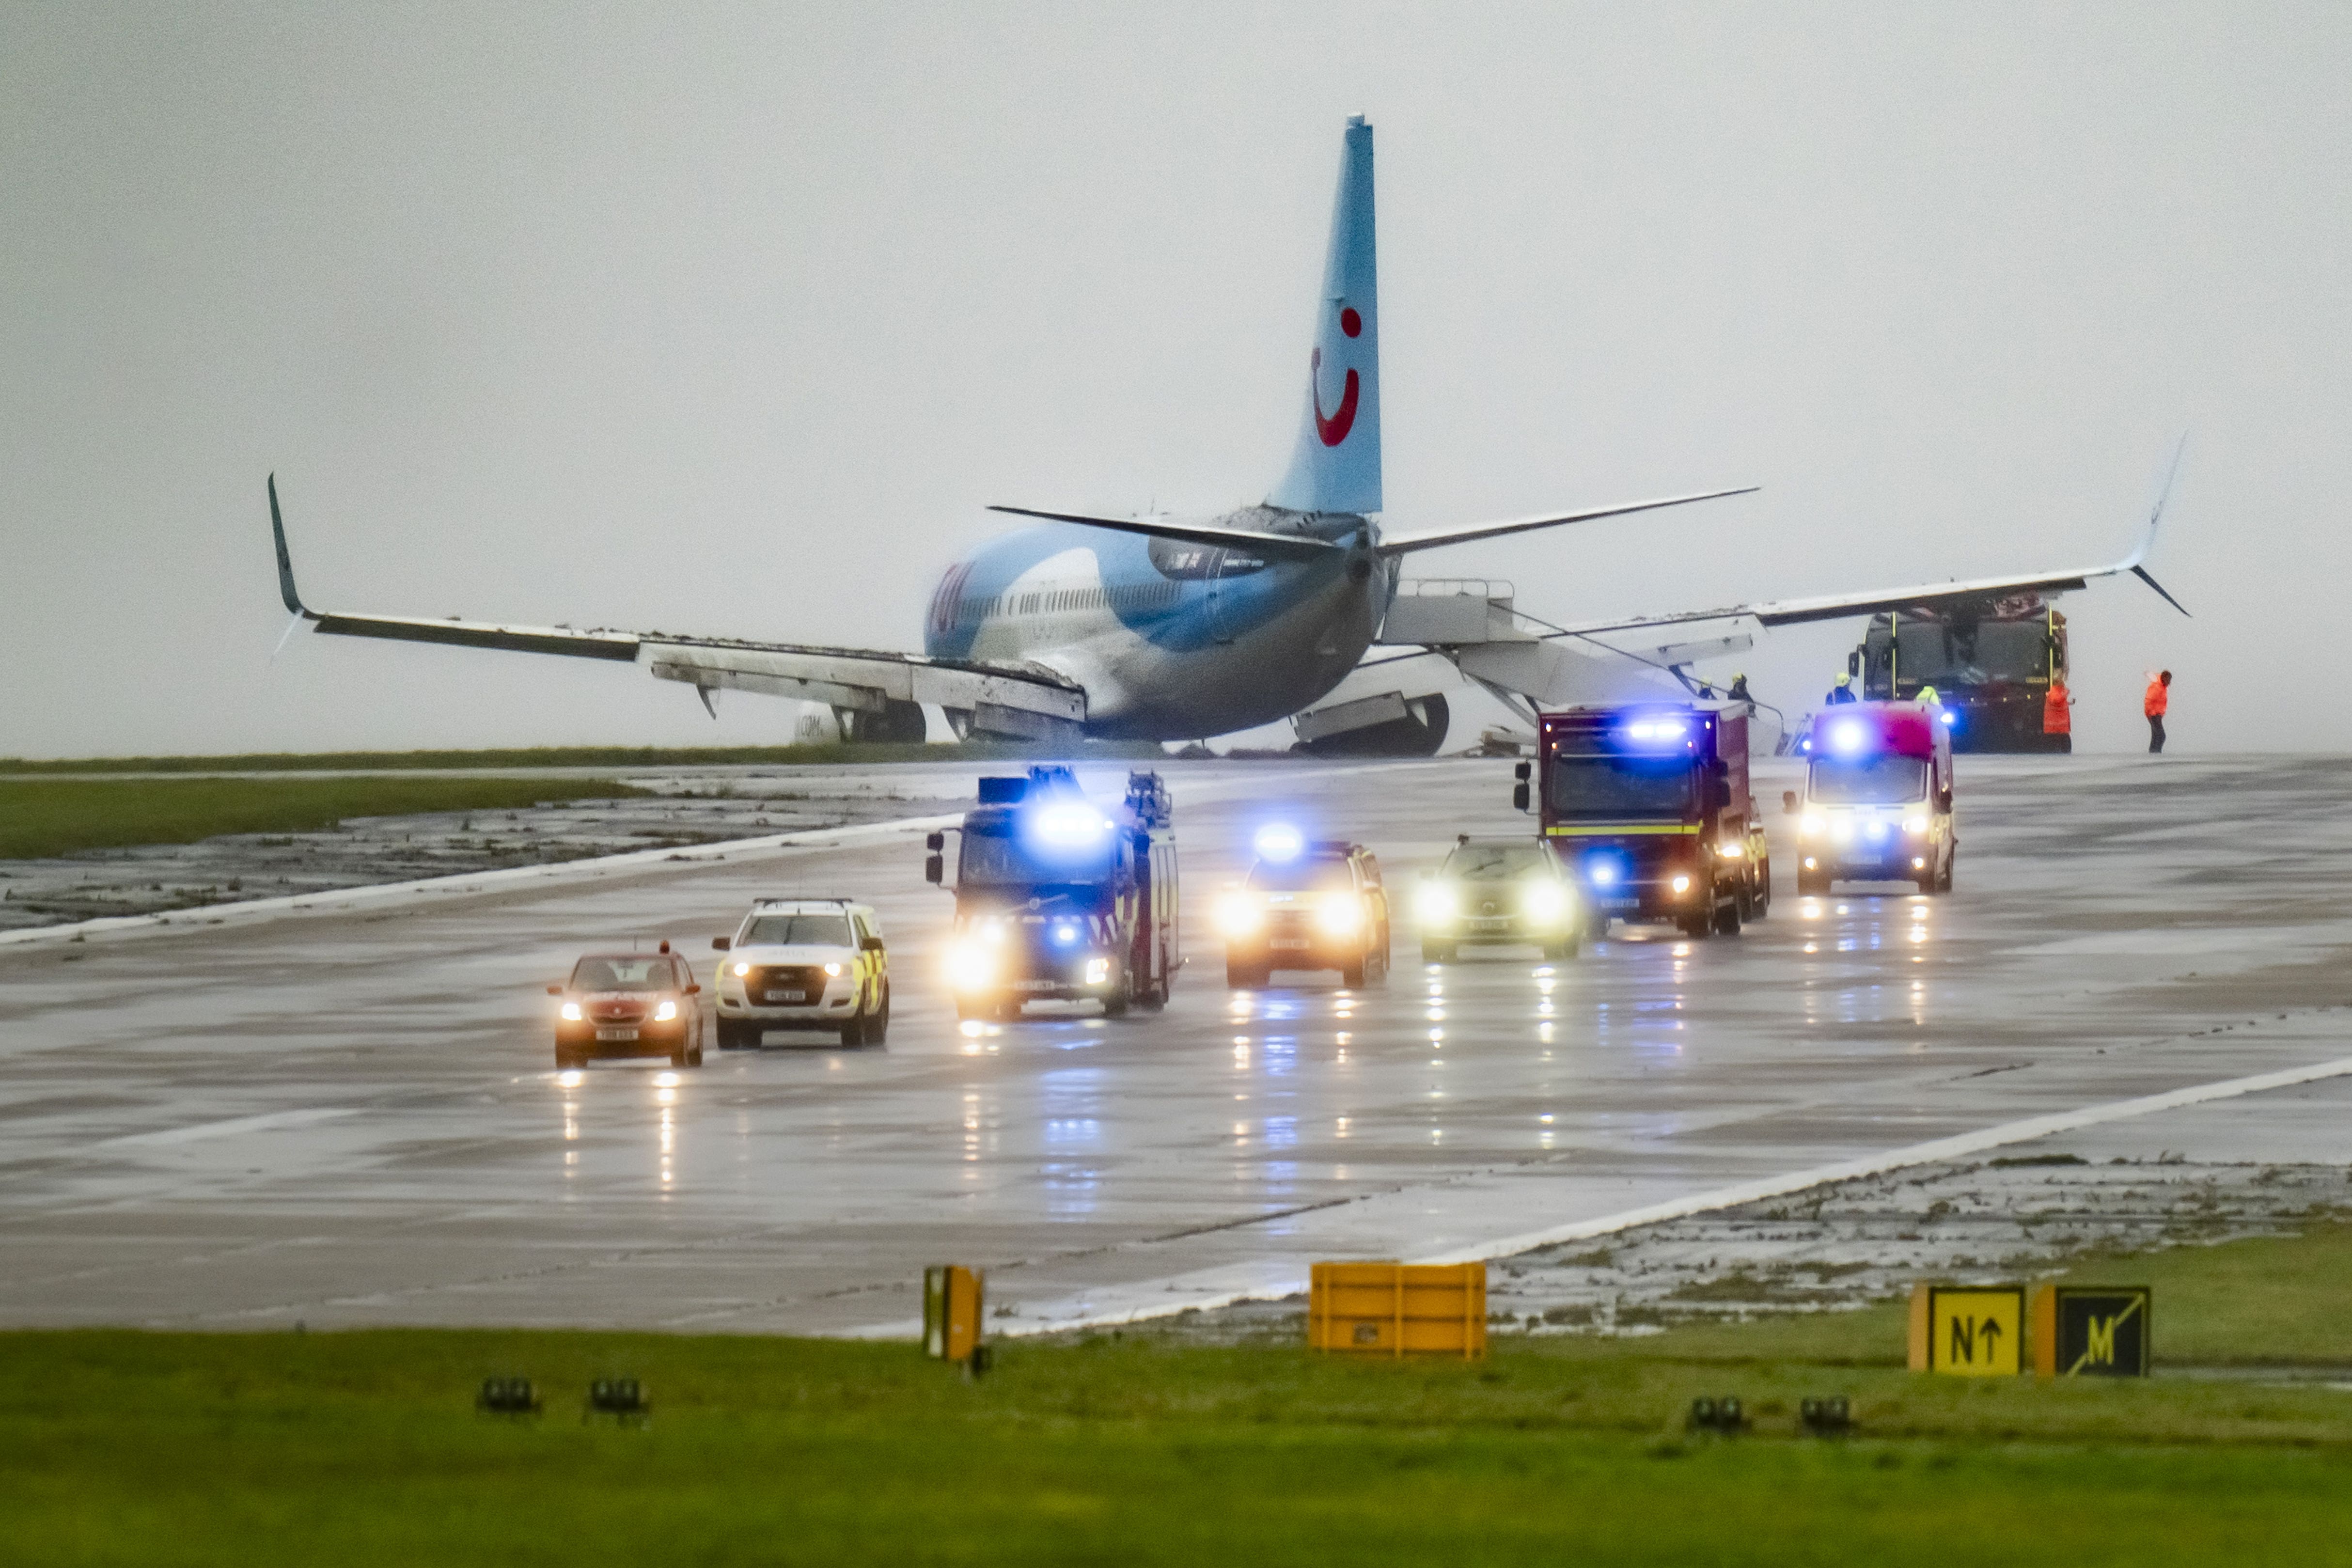 Emergency services attended the scene after a passenger plane came off the runway at Leeds Bradford airport